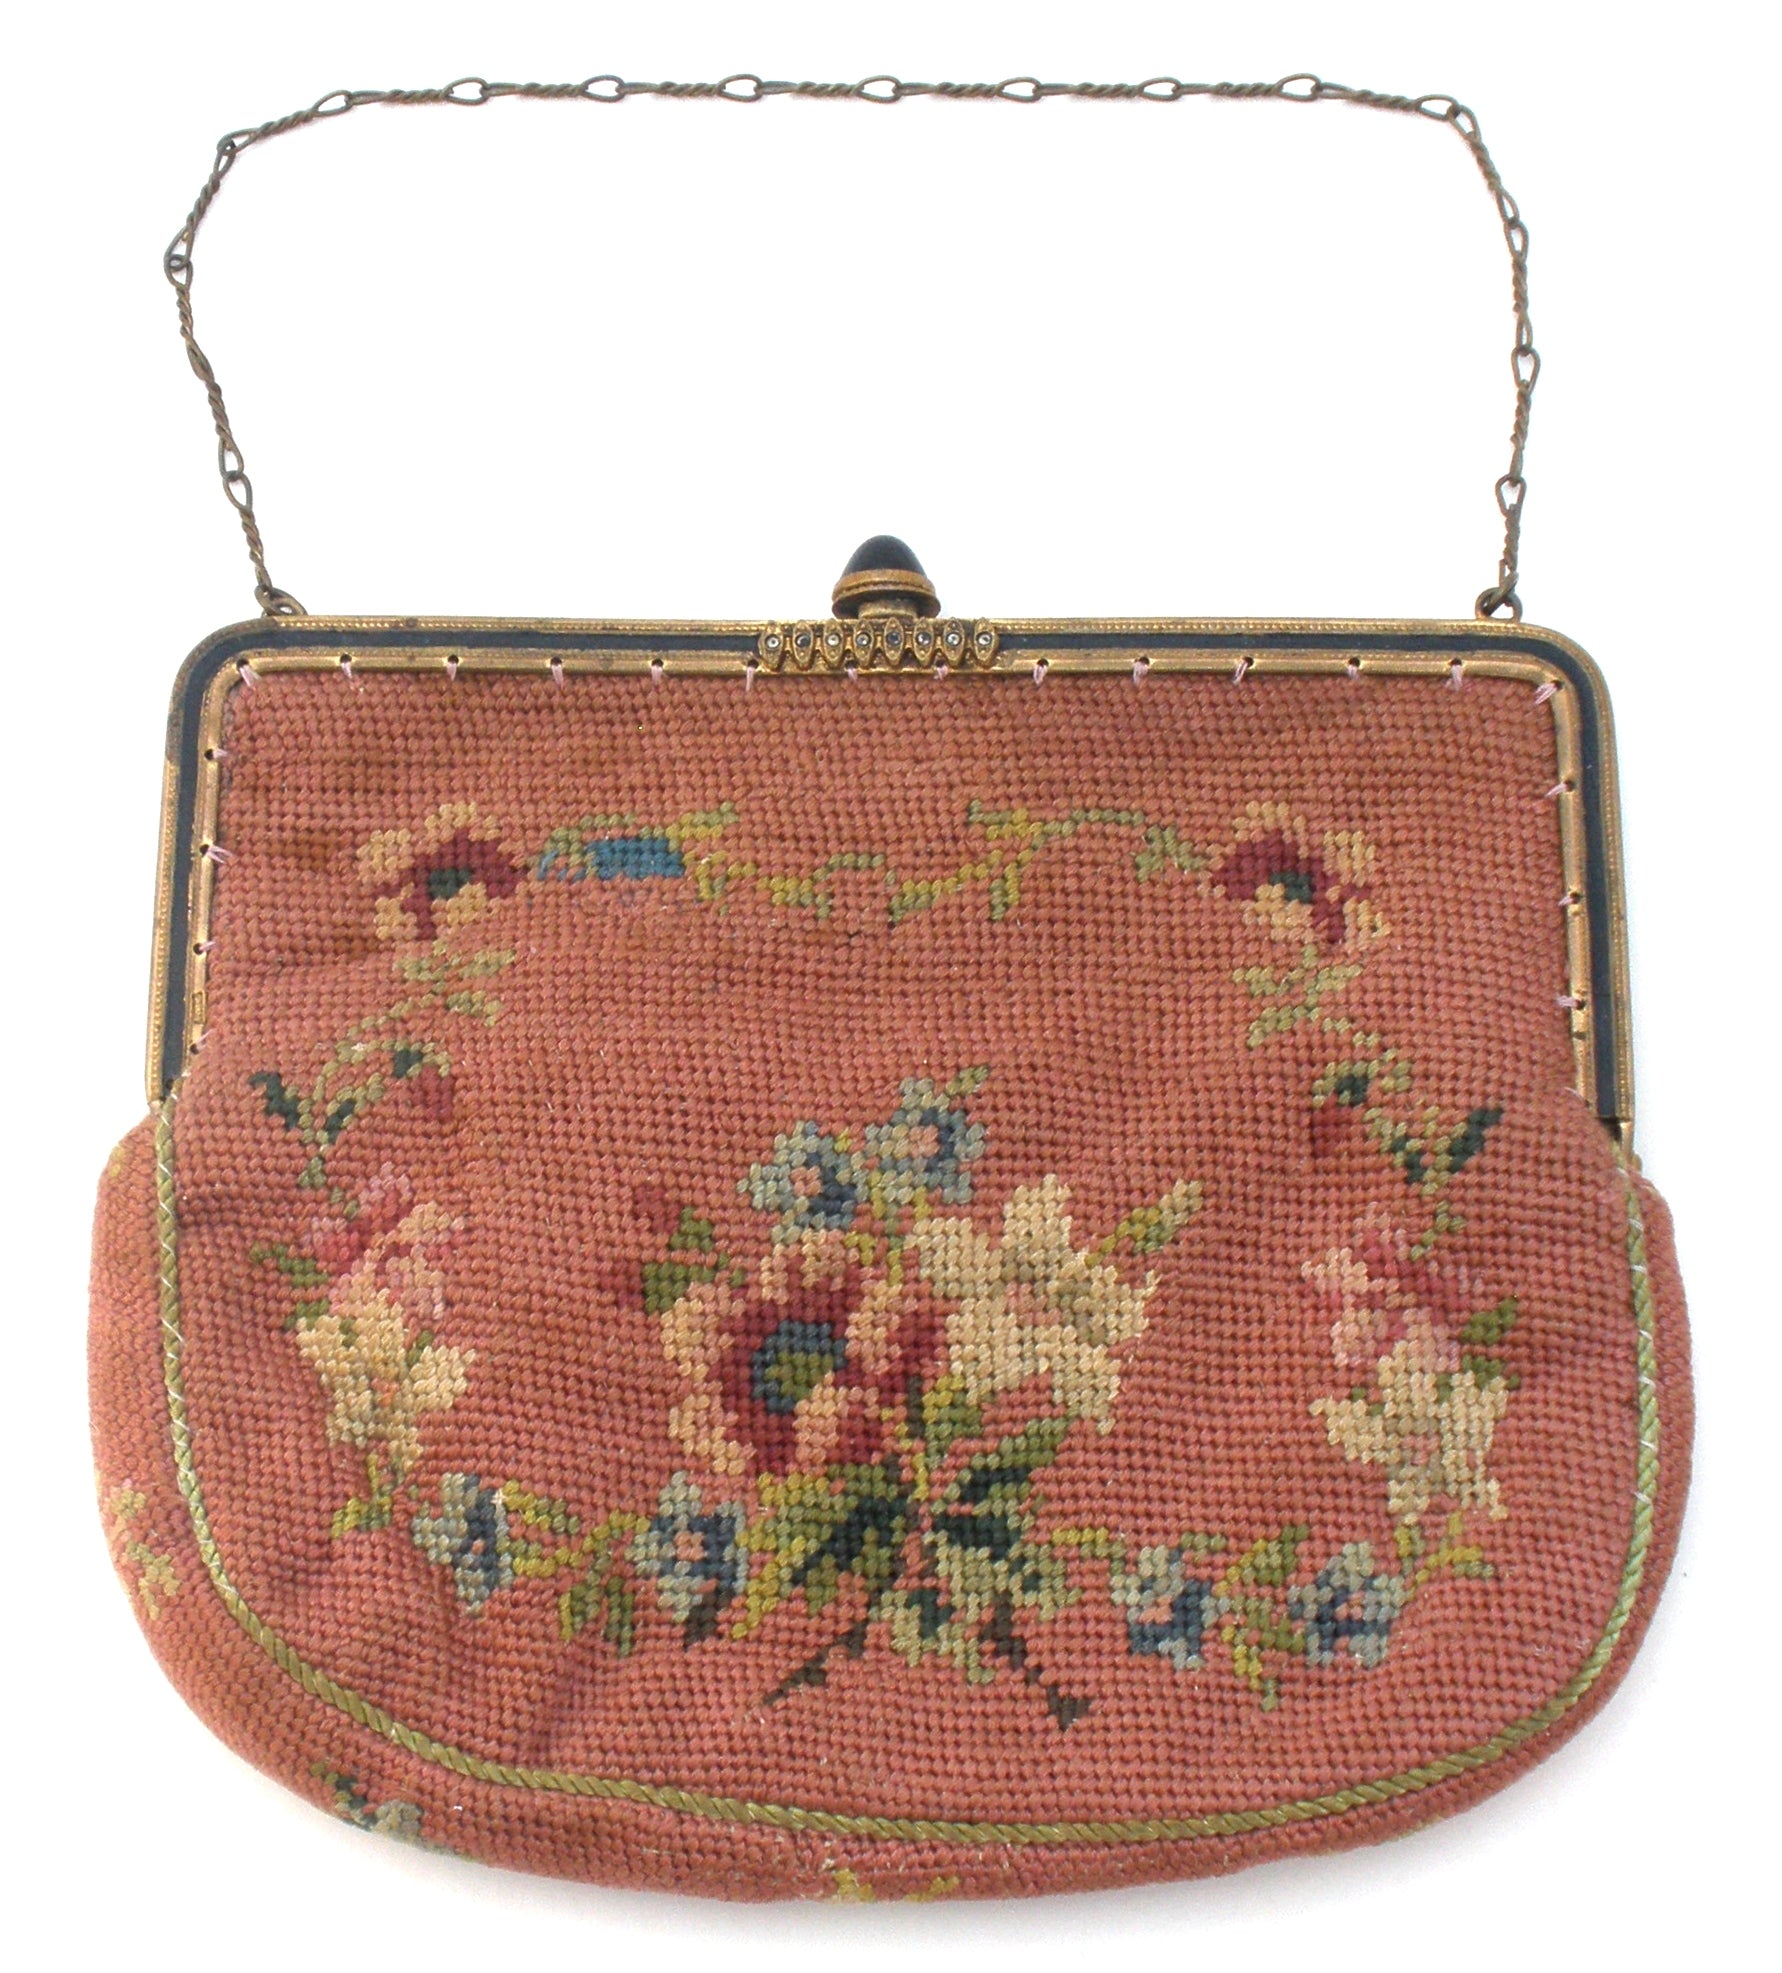 Victorian Needlepoint Bag Embroidered Purse Film and Television Room Decor Collectable Accessories Antique Purse English